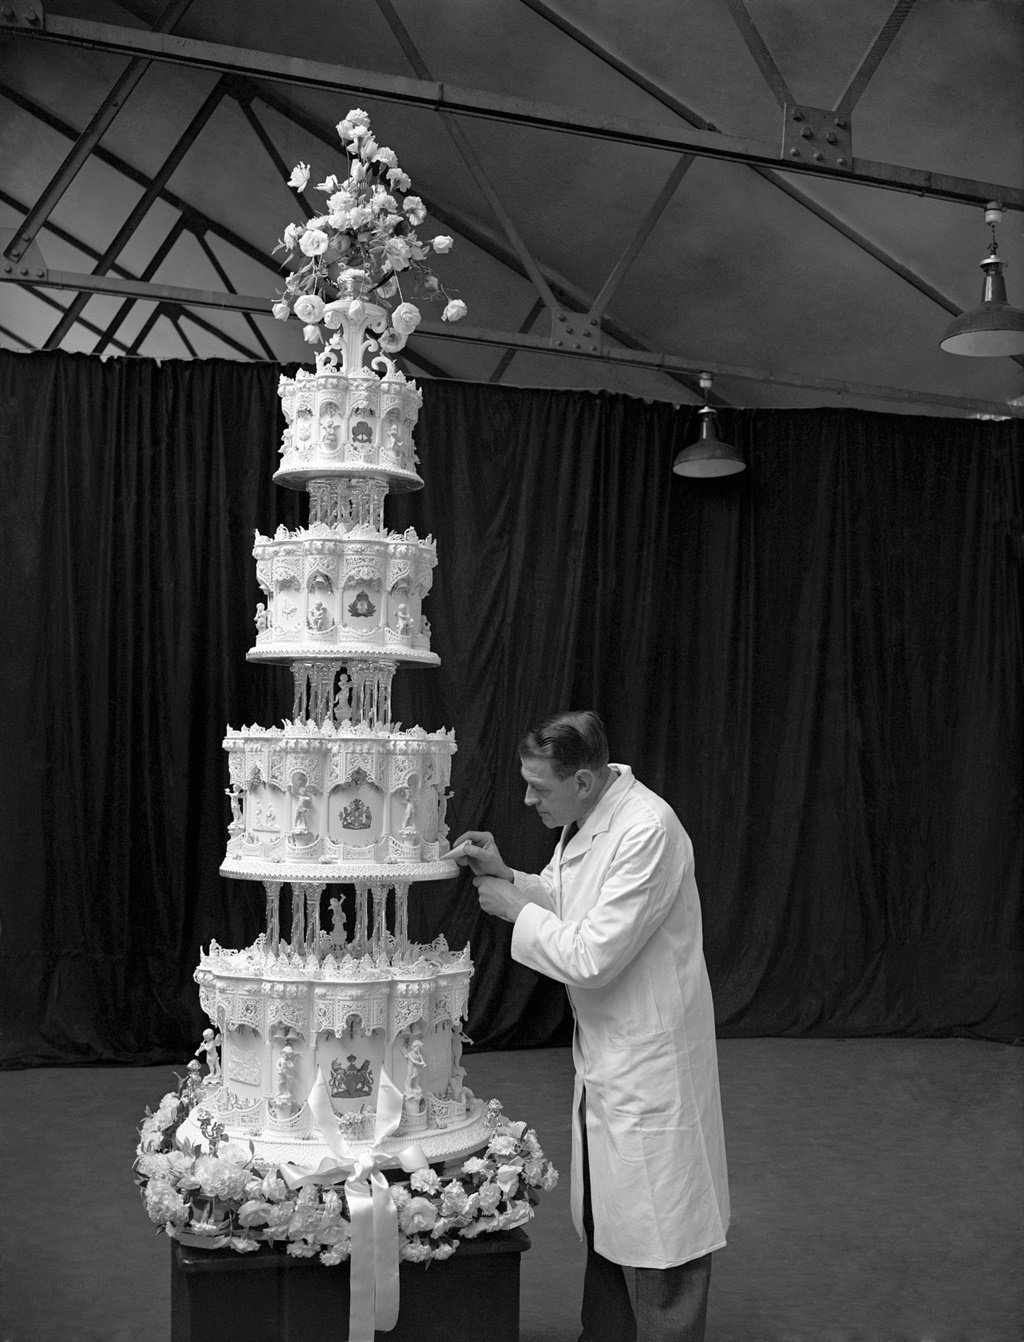 We're sure this royal creation was the wedding cake of the year.